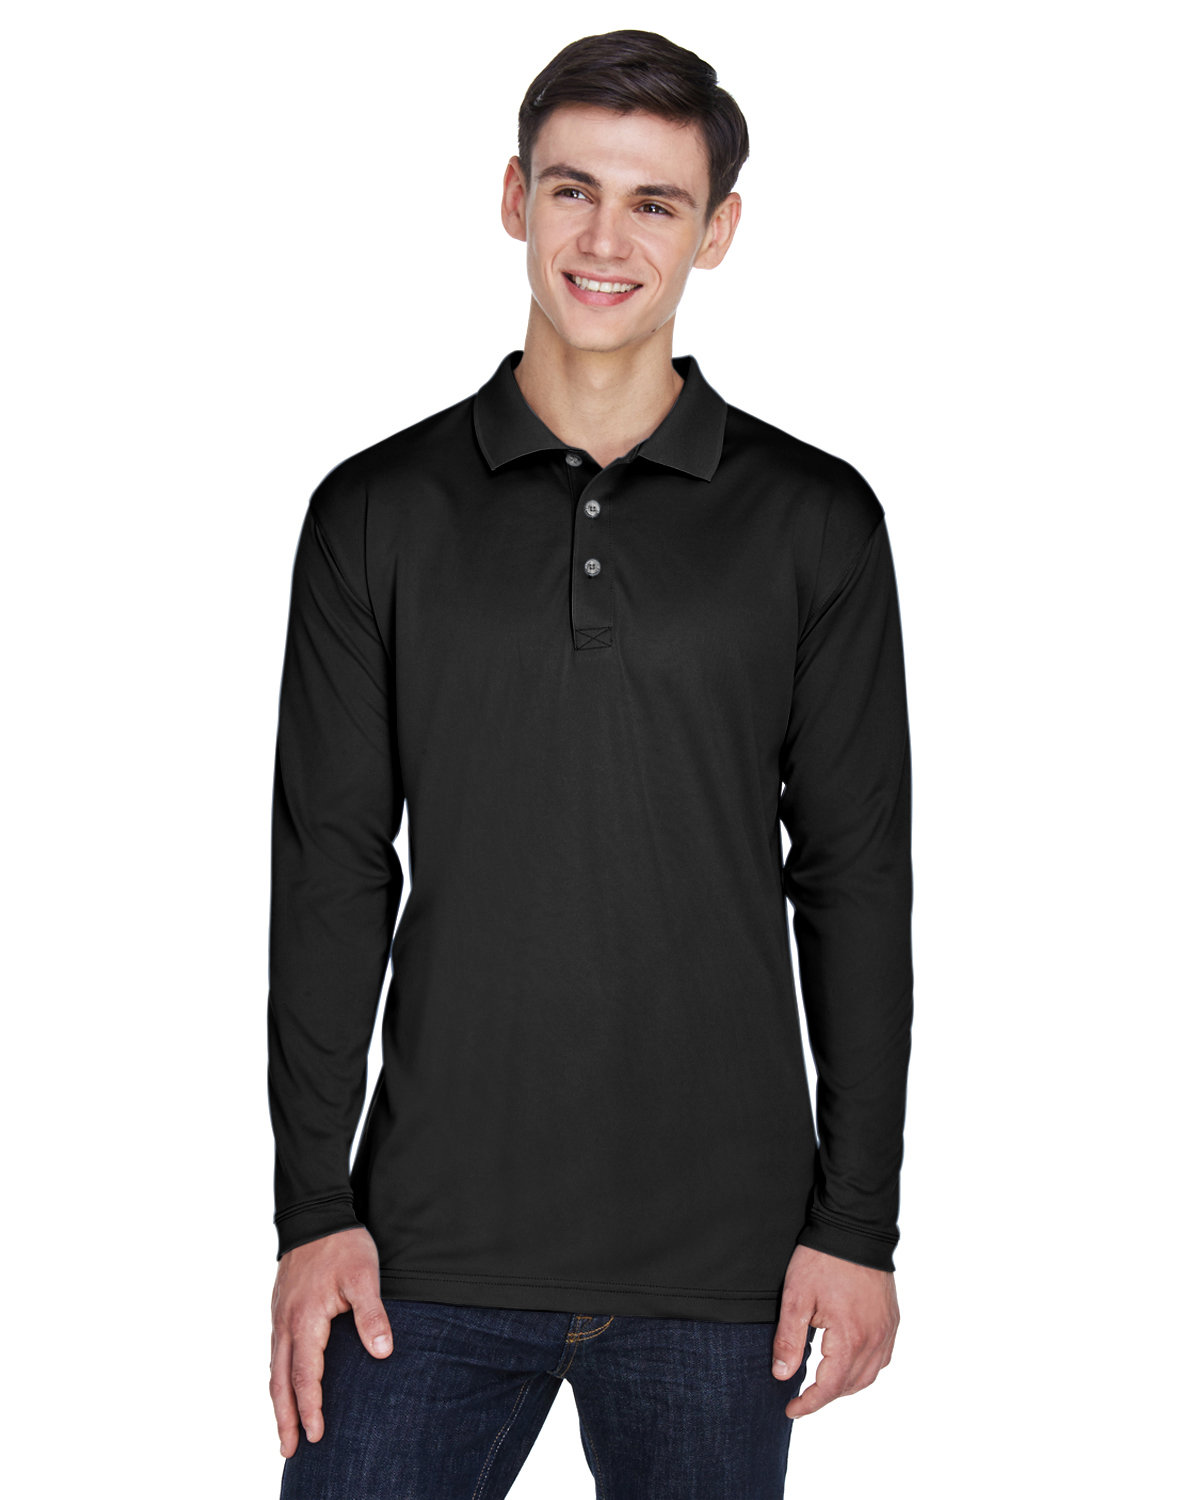 8405LS UltraClub Adult Cool & Dry Sport Long-Sleeve Polo